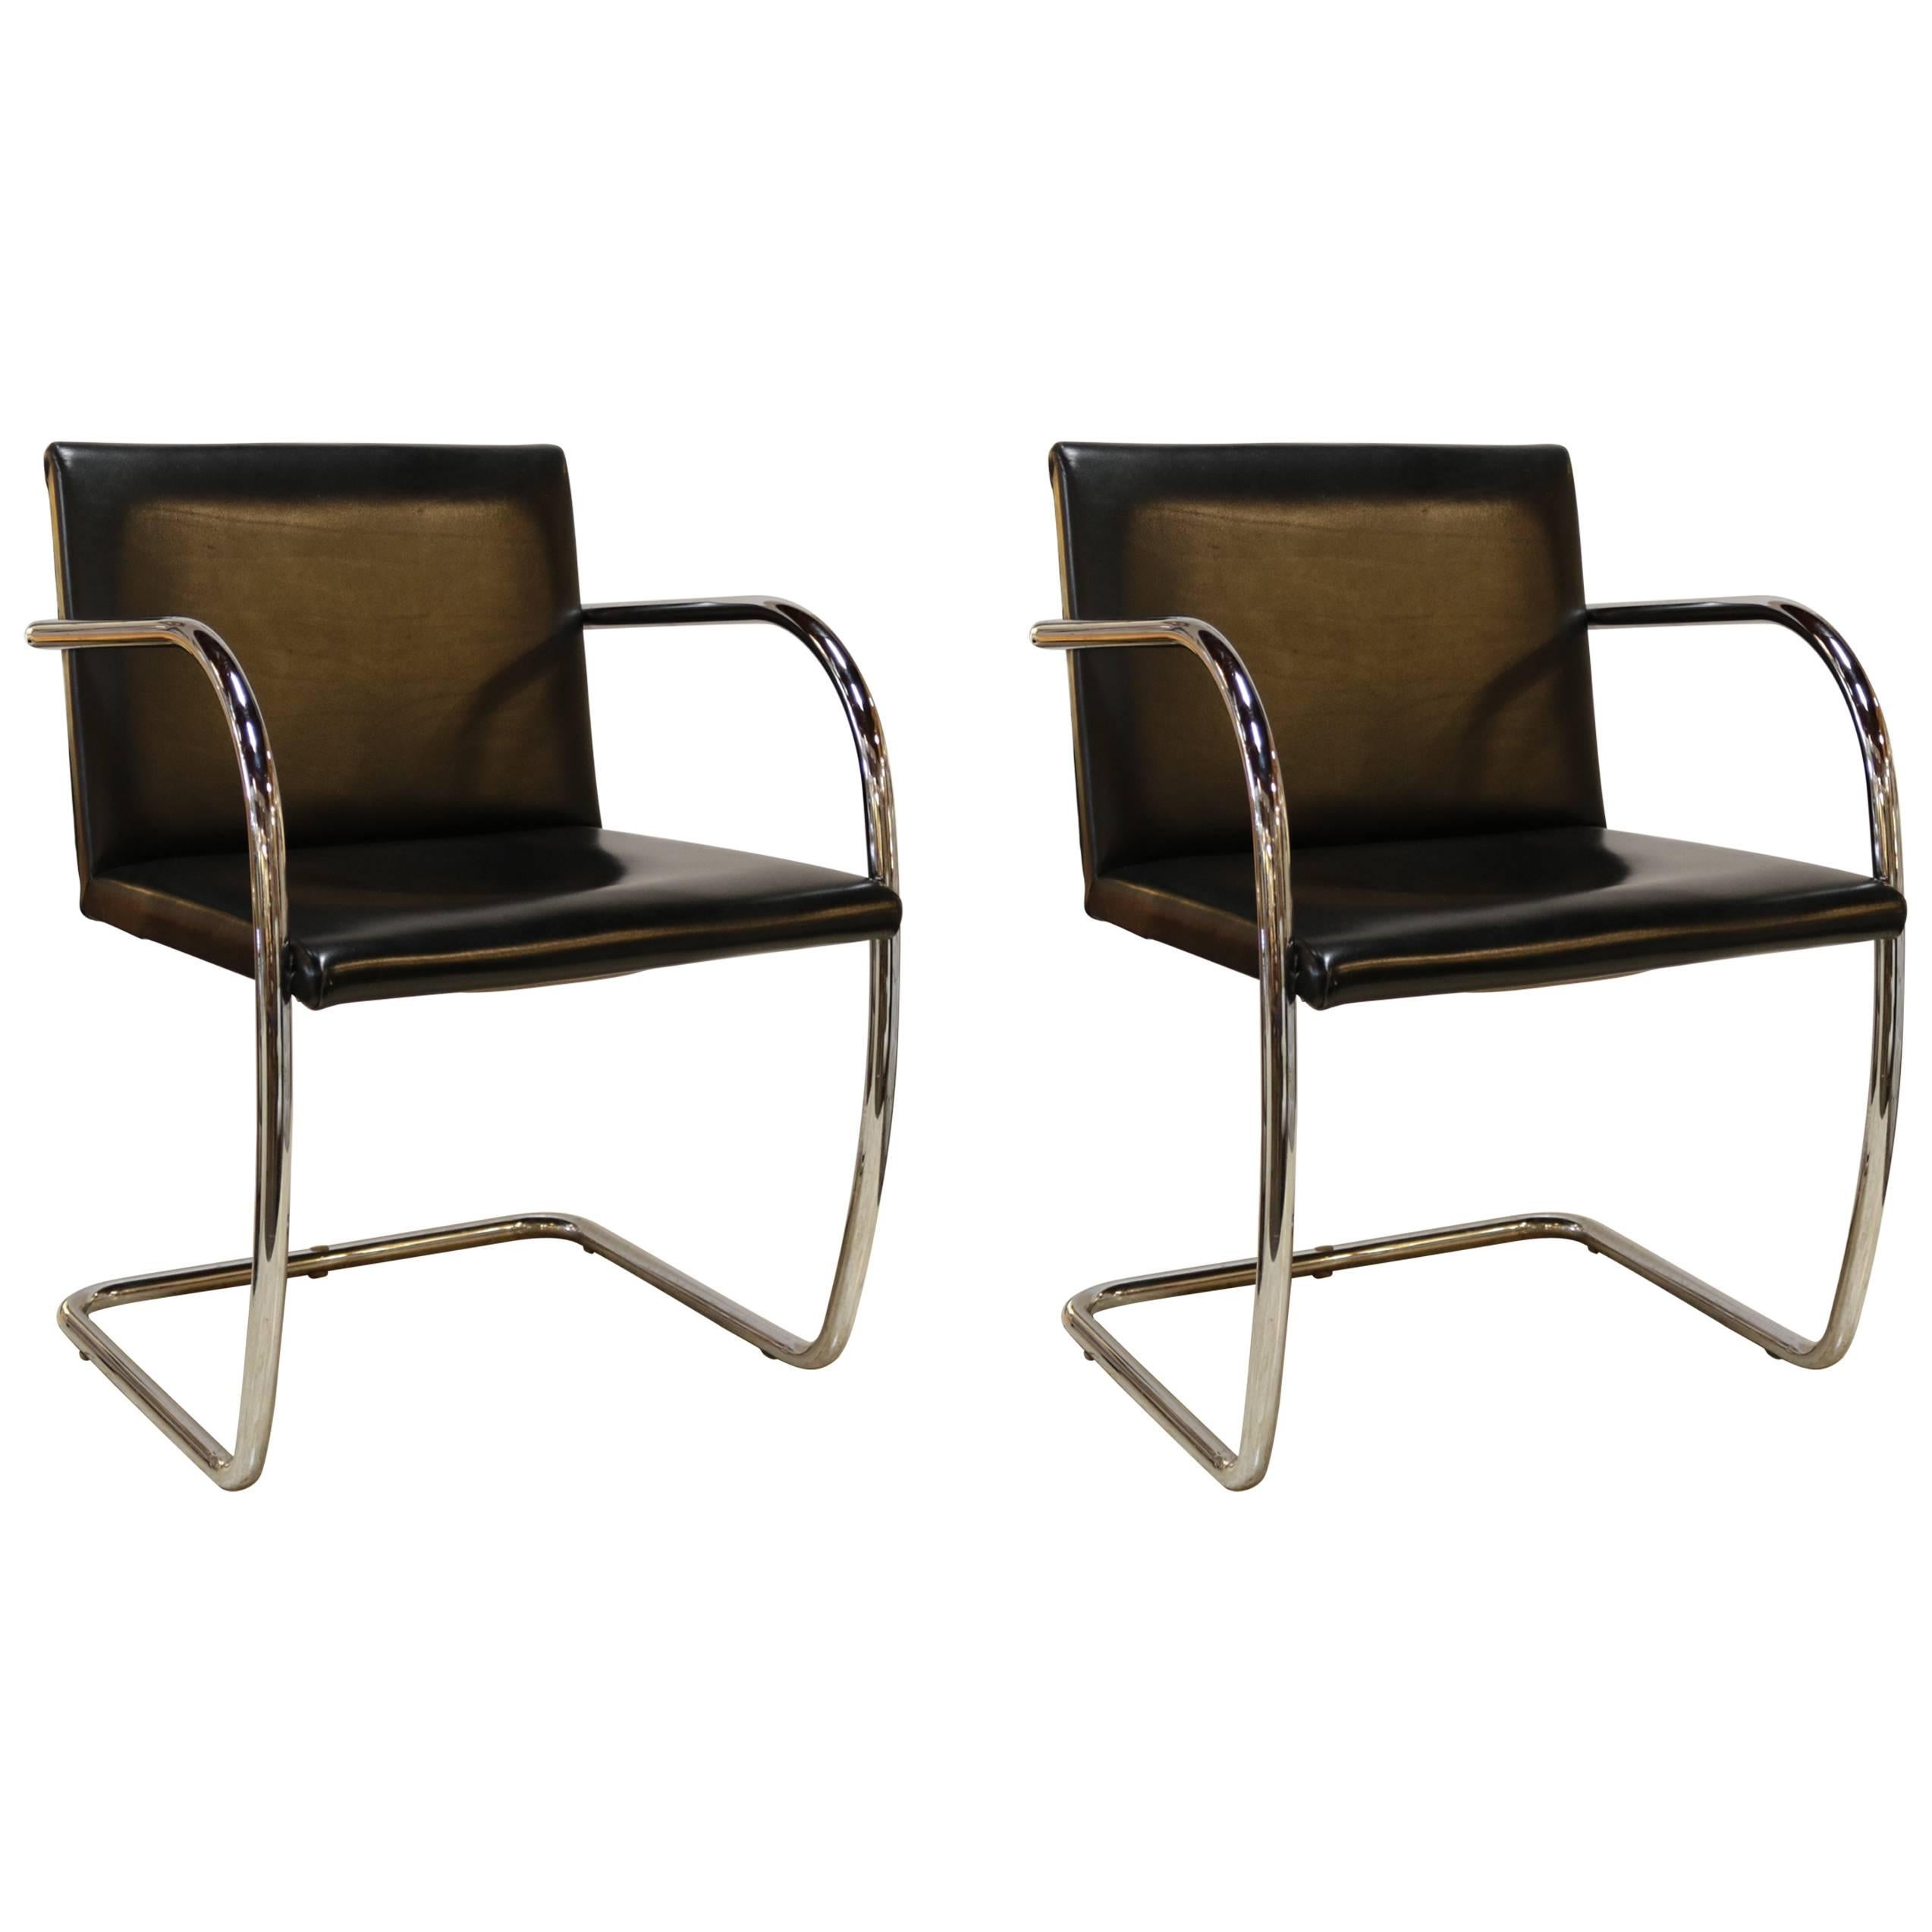 Pair of Black Leather and Chrome Brno Chairs by Mies van der Rohe